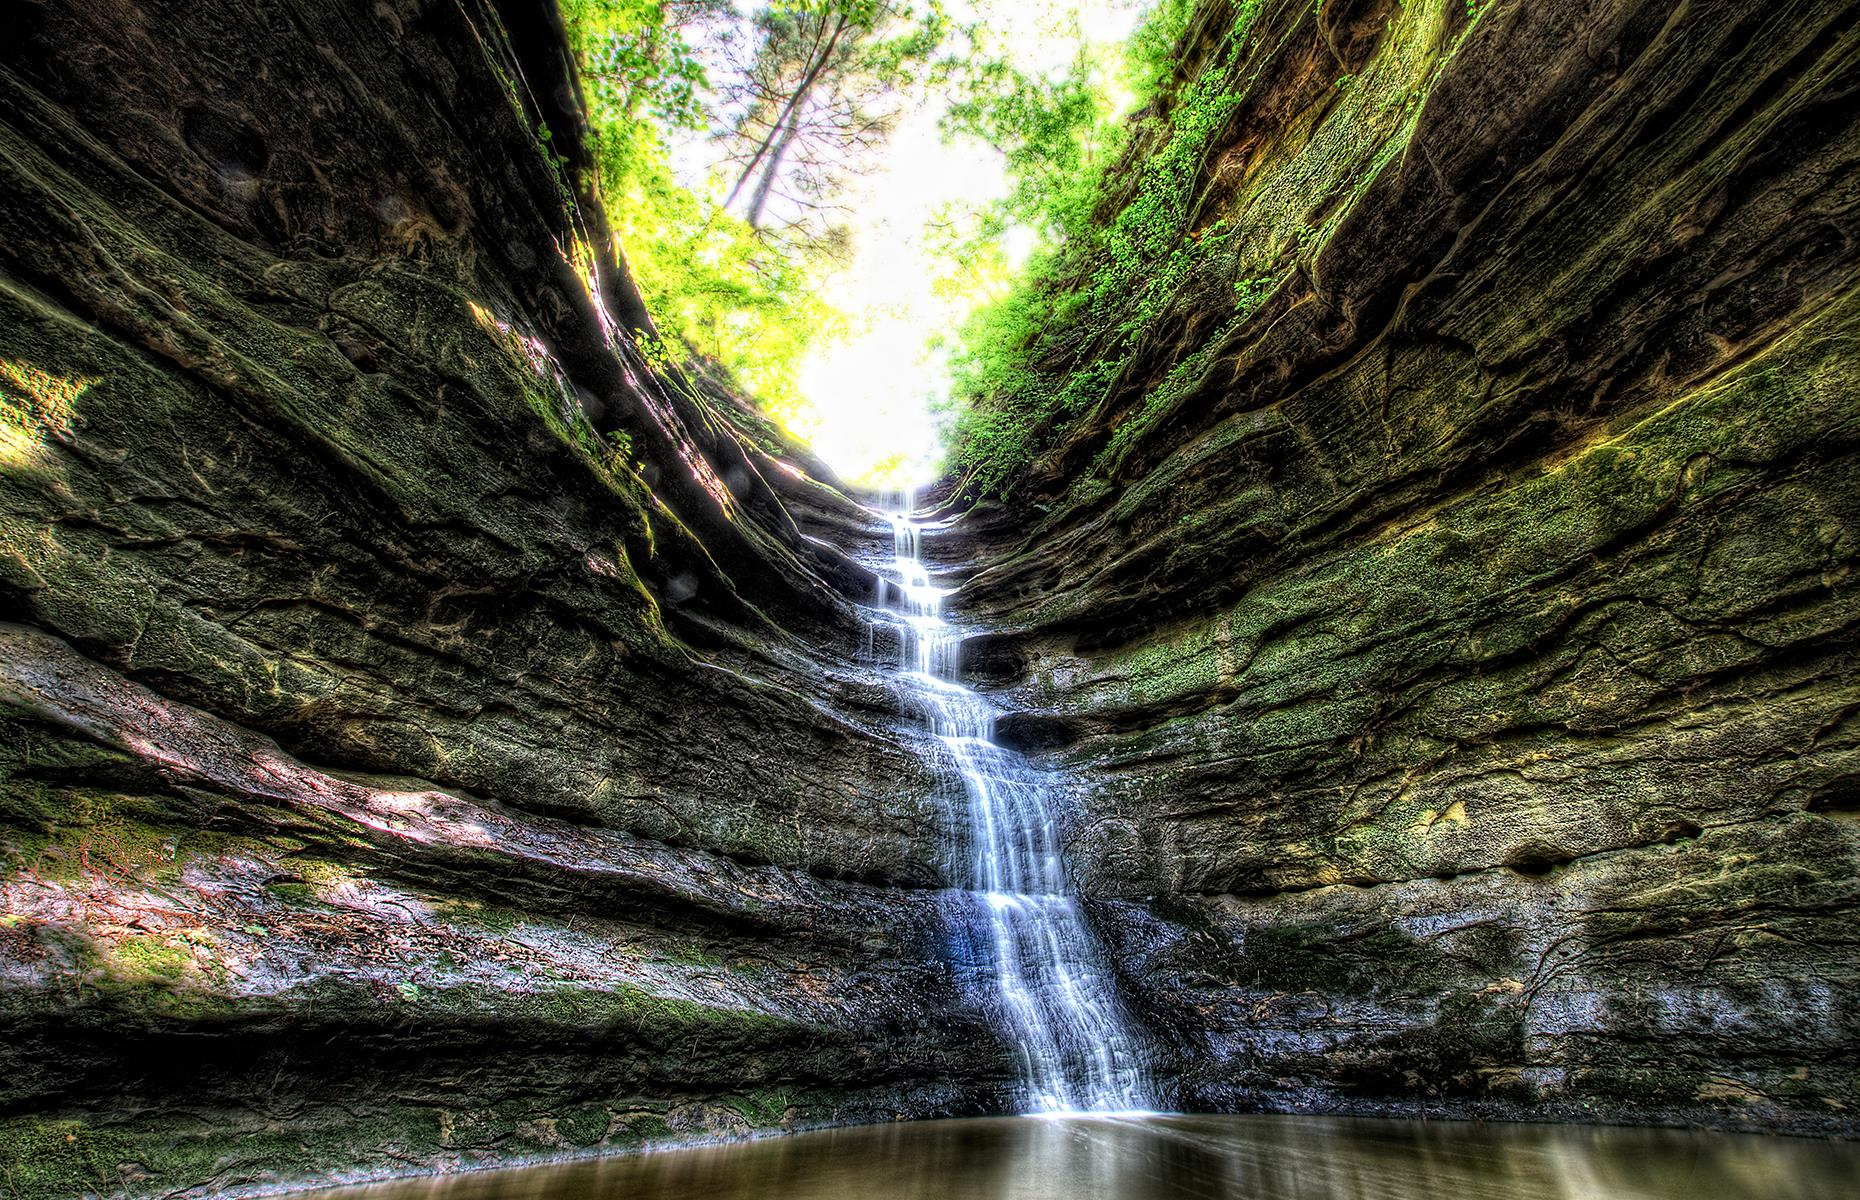 <p>As the name might suggest, this park's winning feature is its dramatic rock formations. Starved Rock State Park is home to a total of 18 canyons, with waterfalls forming during springtime and after heavy rain. Its web of trails reaches across 13 miles (21km) and takes hikers past rocky gorges, wildflower-filled meadows and, in the winter, ice sculptures formed from frozen watery cascades. Now discover <a href="https://www.loveexploring.com/galleries/86372/the-most-beautiful-state-park-in-every-us-state?page=1">the most beautiful state park near you.</a></p>